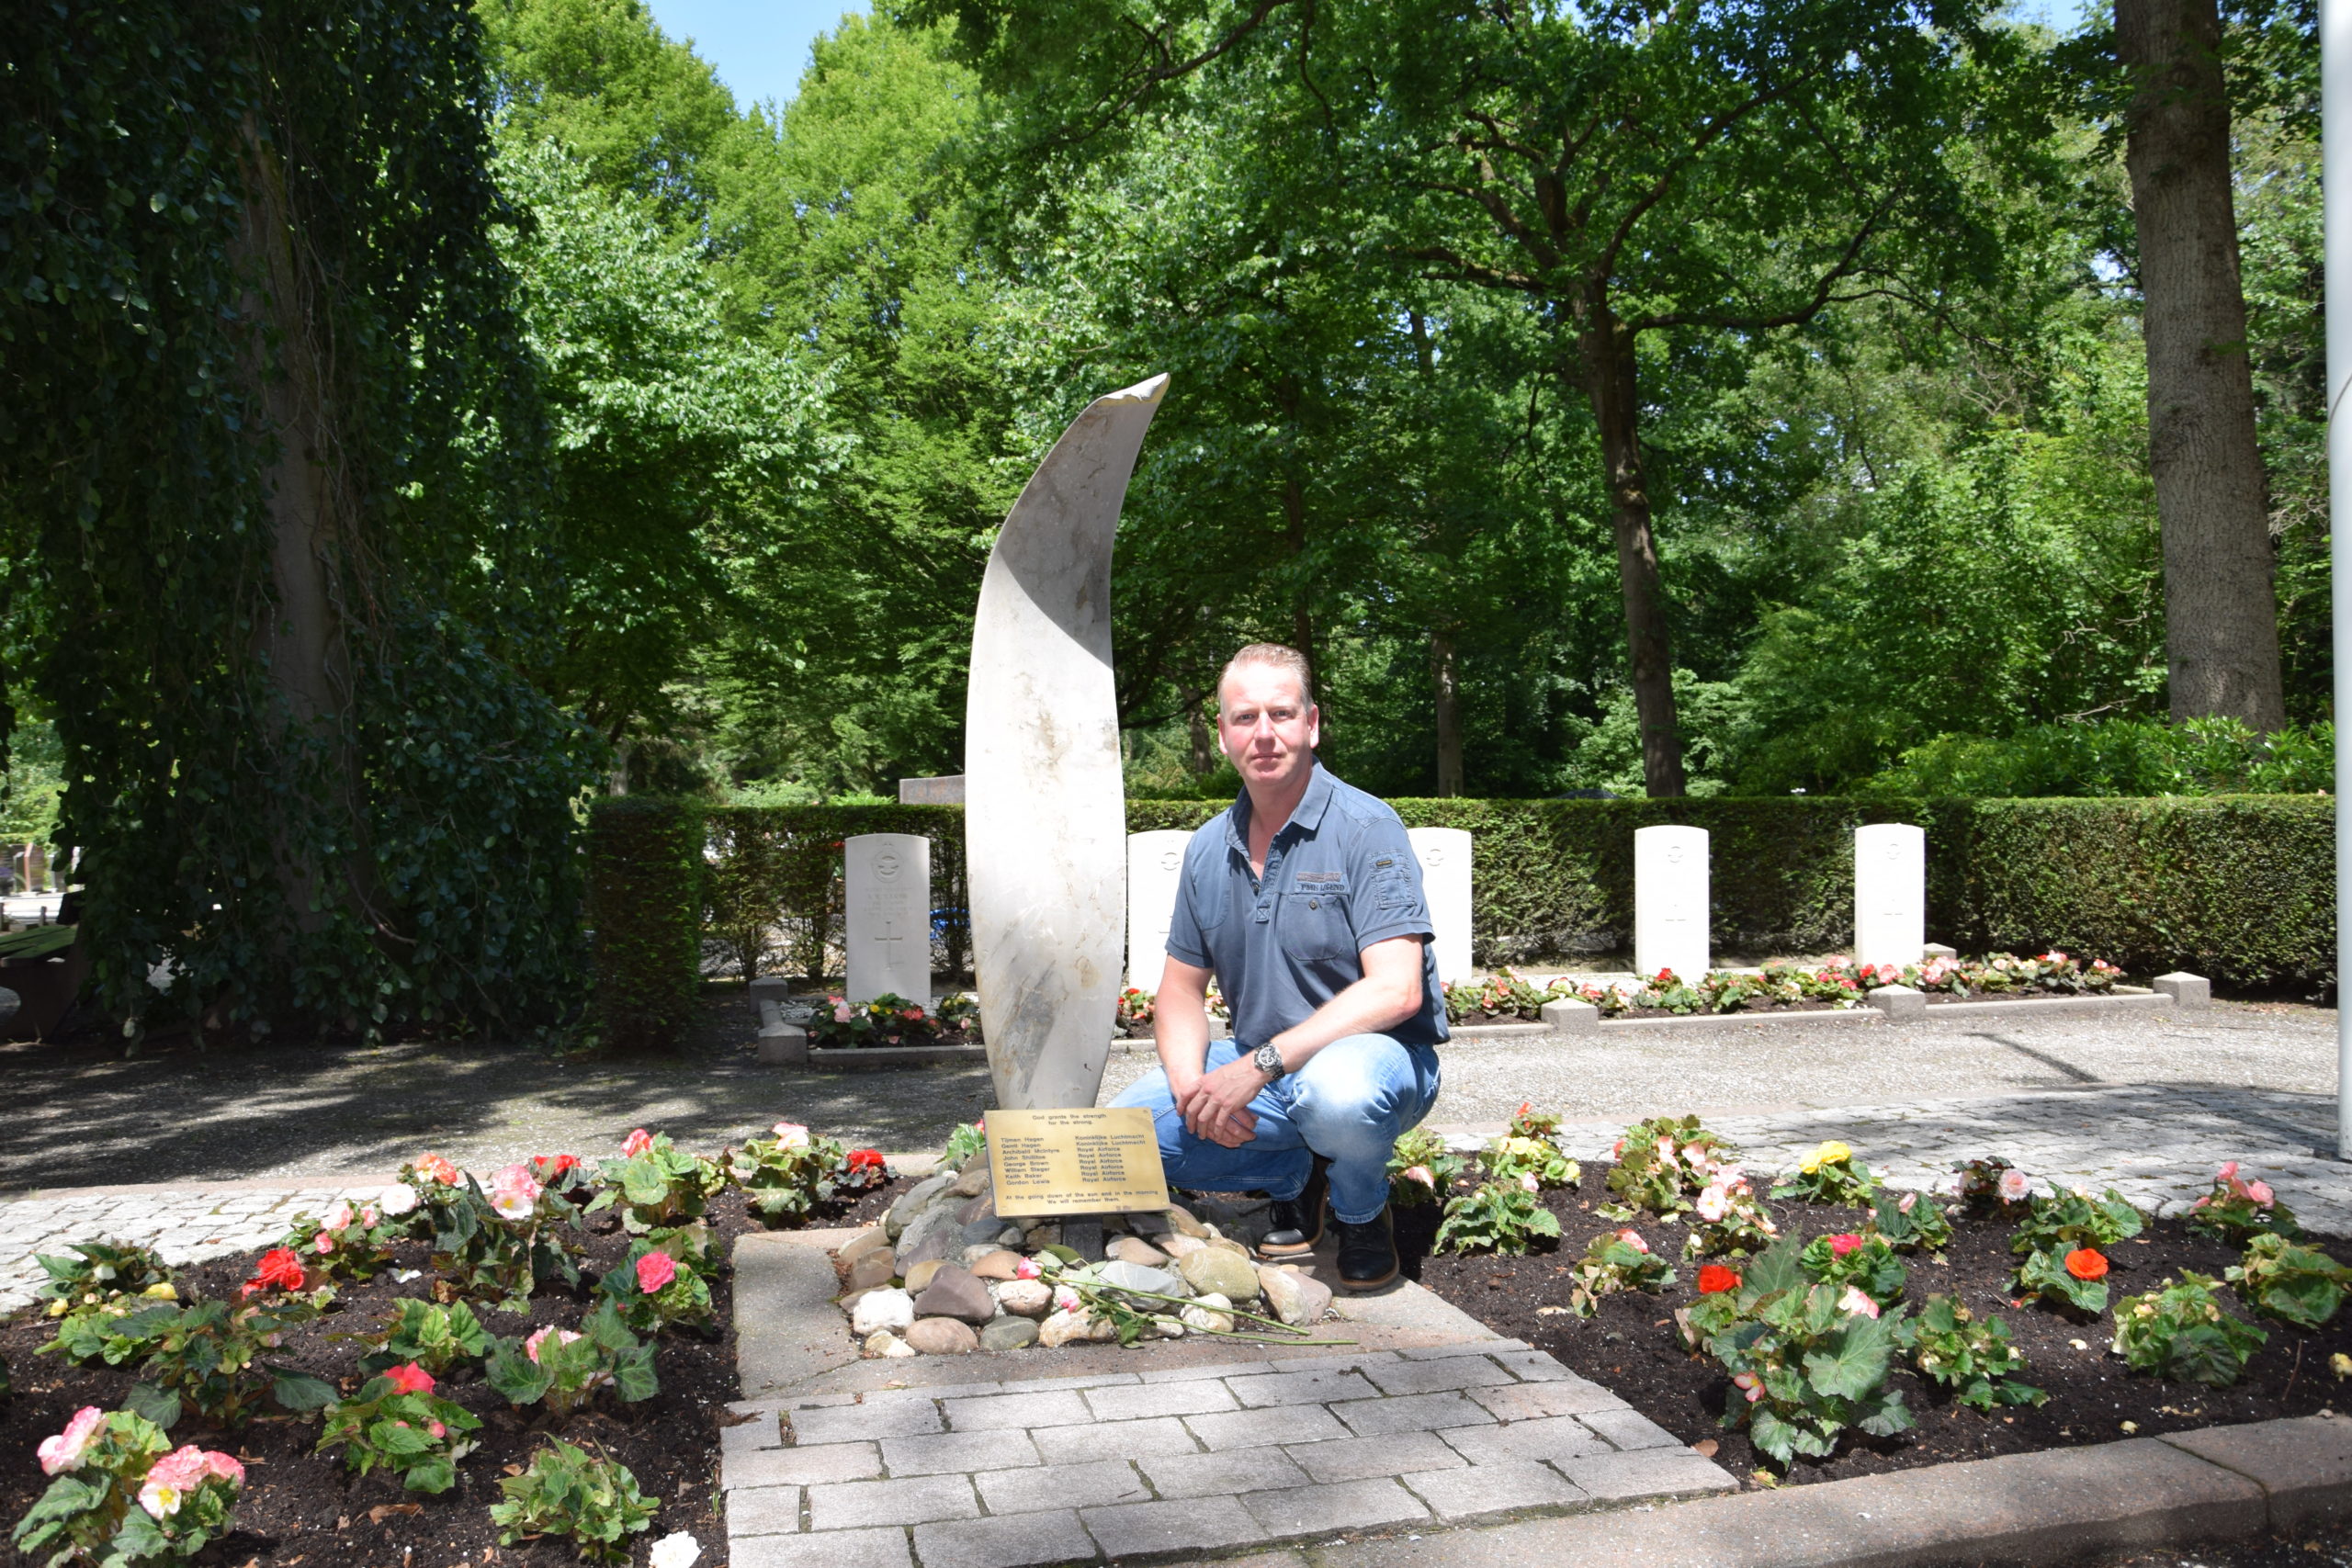 Mr Scheer at the site of the memorial.